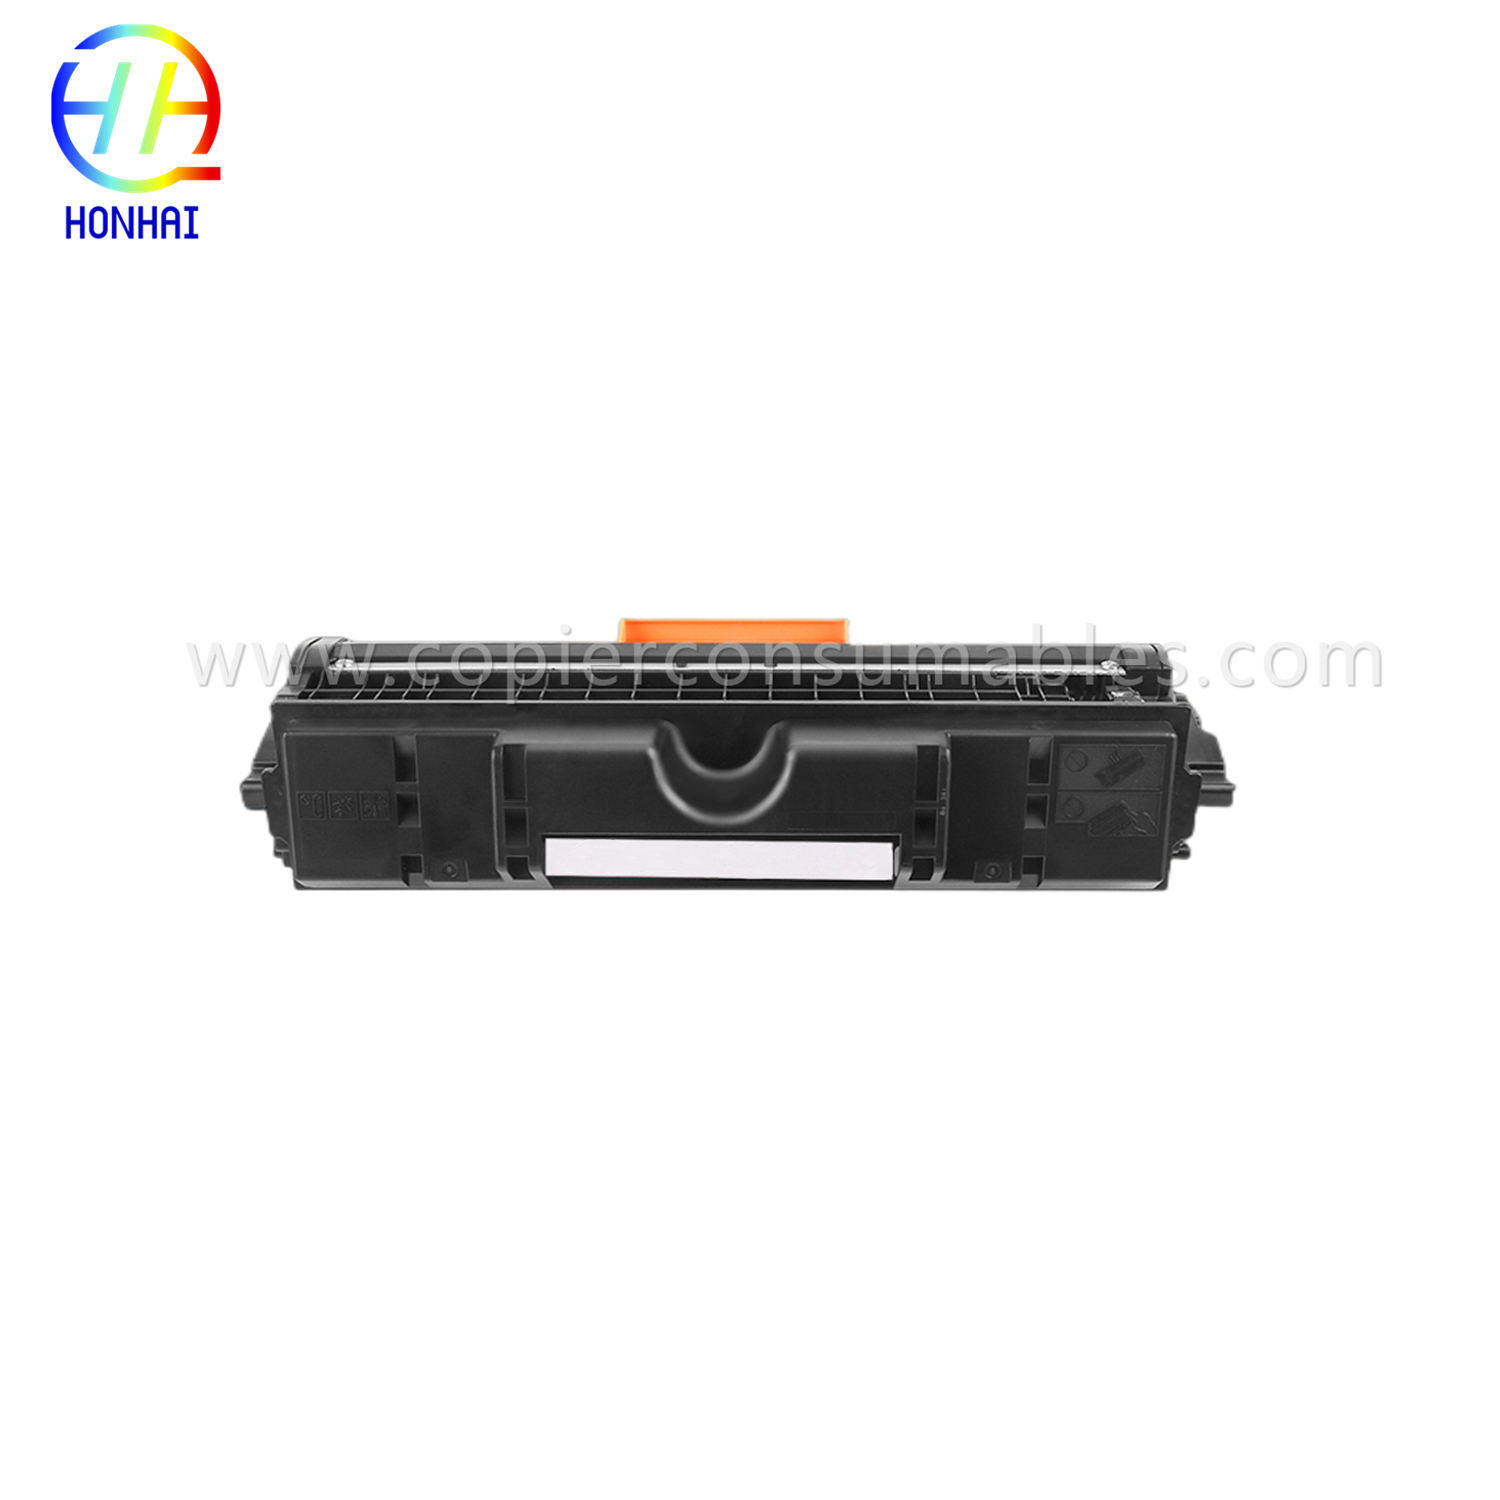 Toner Cartridge for HP CE314A